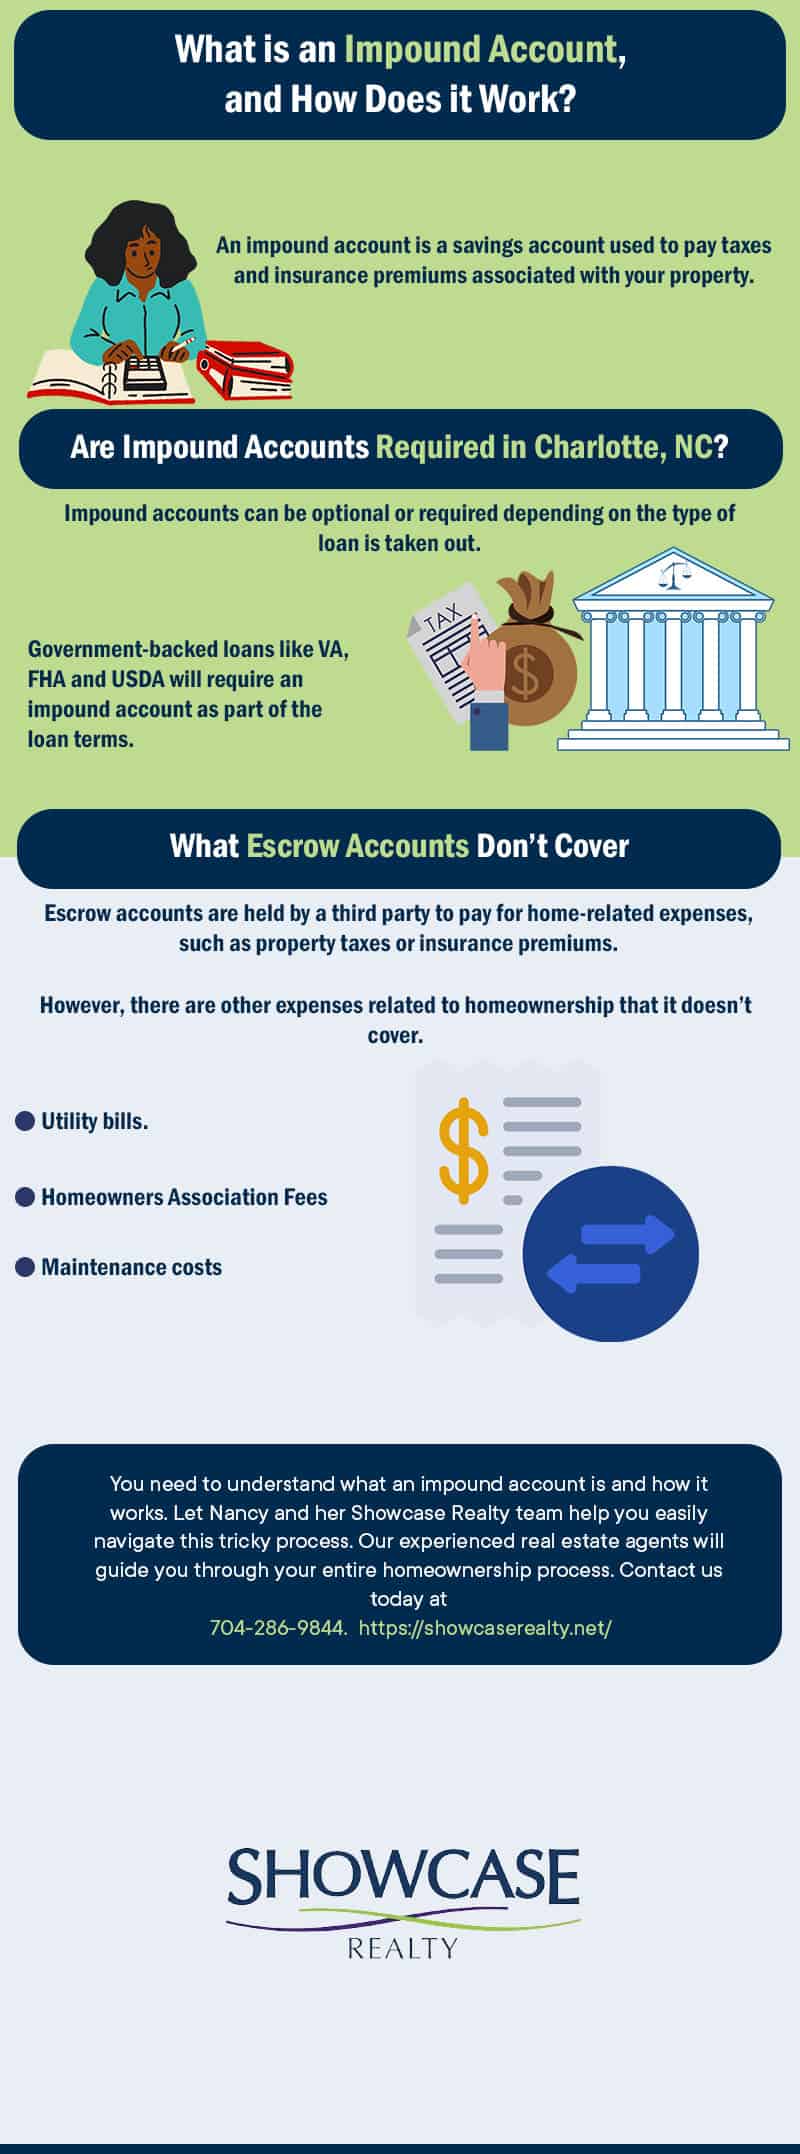 Showcase Realty - Confused about impound accounts and how they relate to your real estate journey in Charlotte, NC? Our real estate experts have covered you, providing a smart, comprehensive overview of these accounts in our latest blog post.